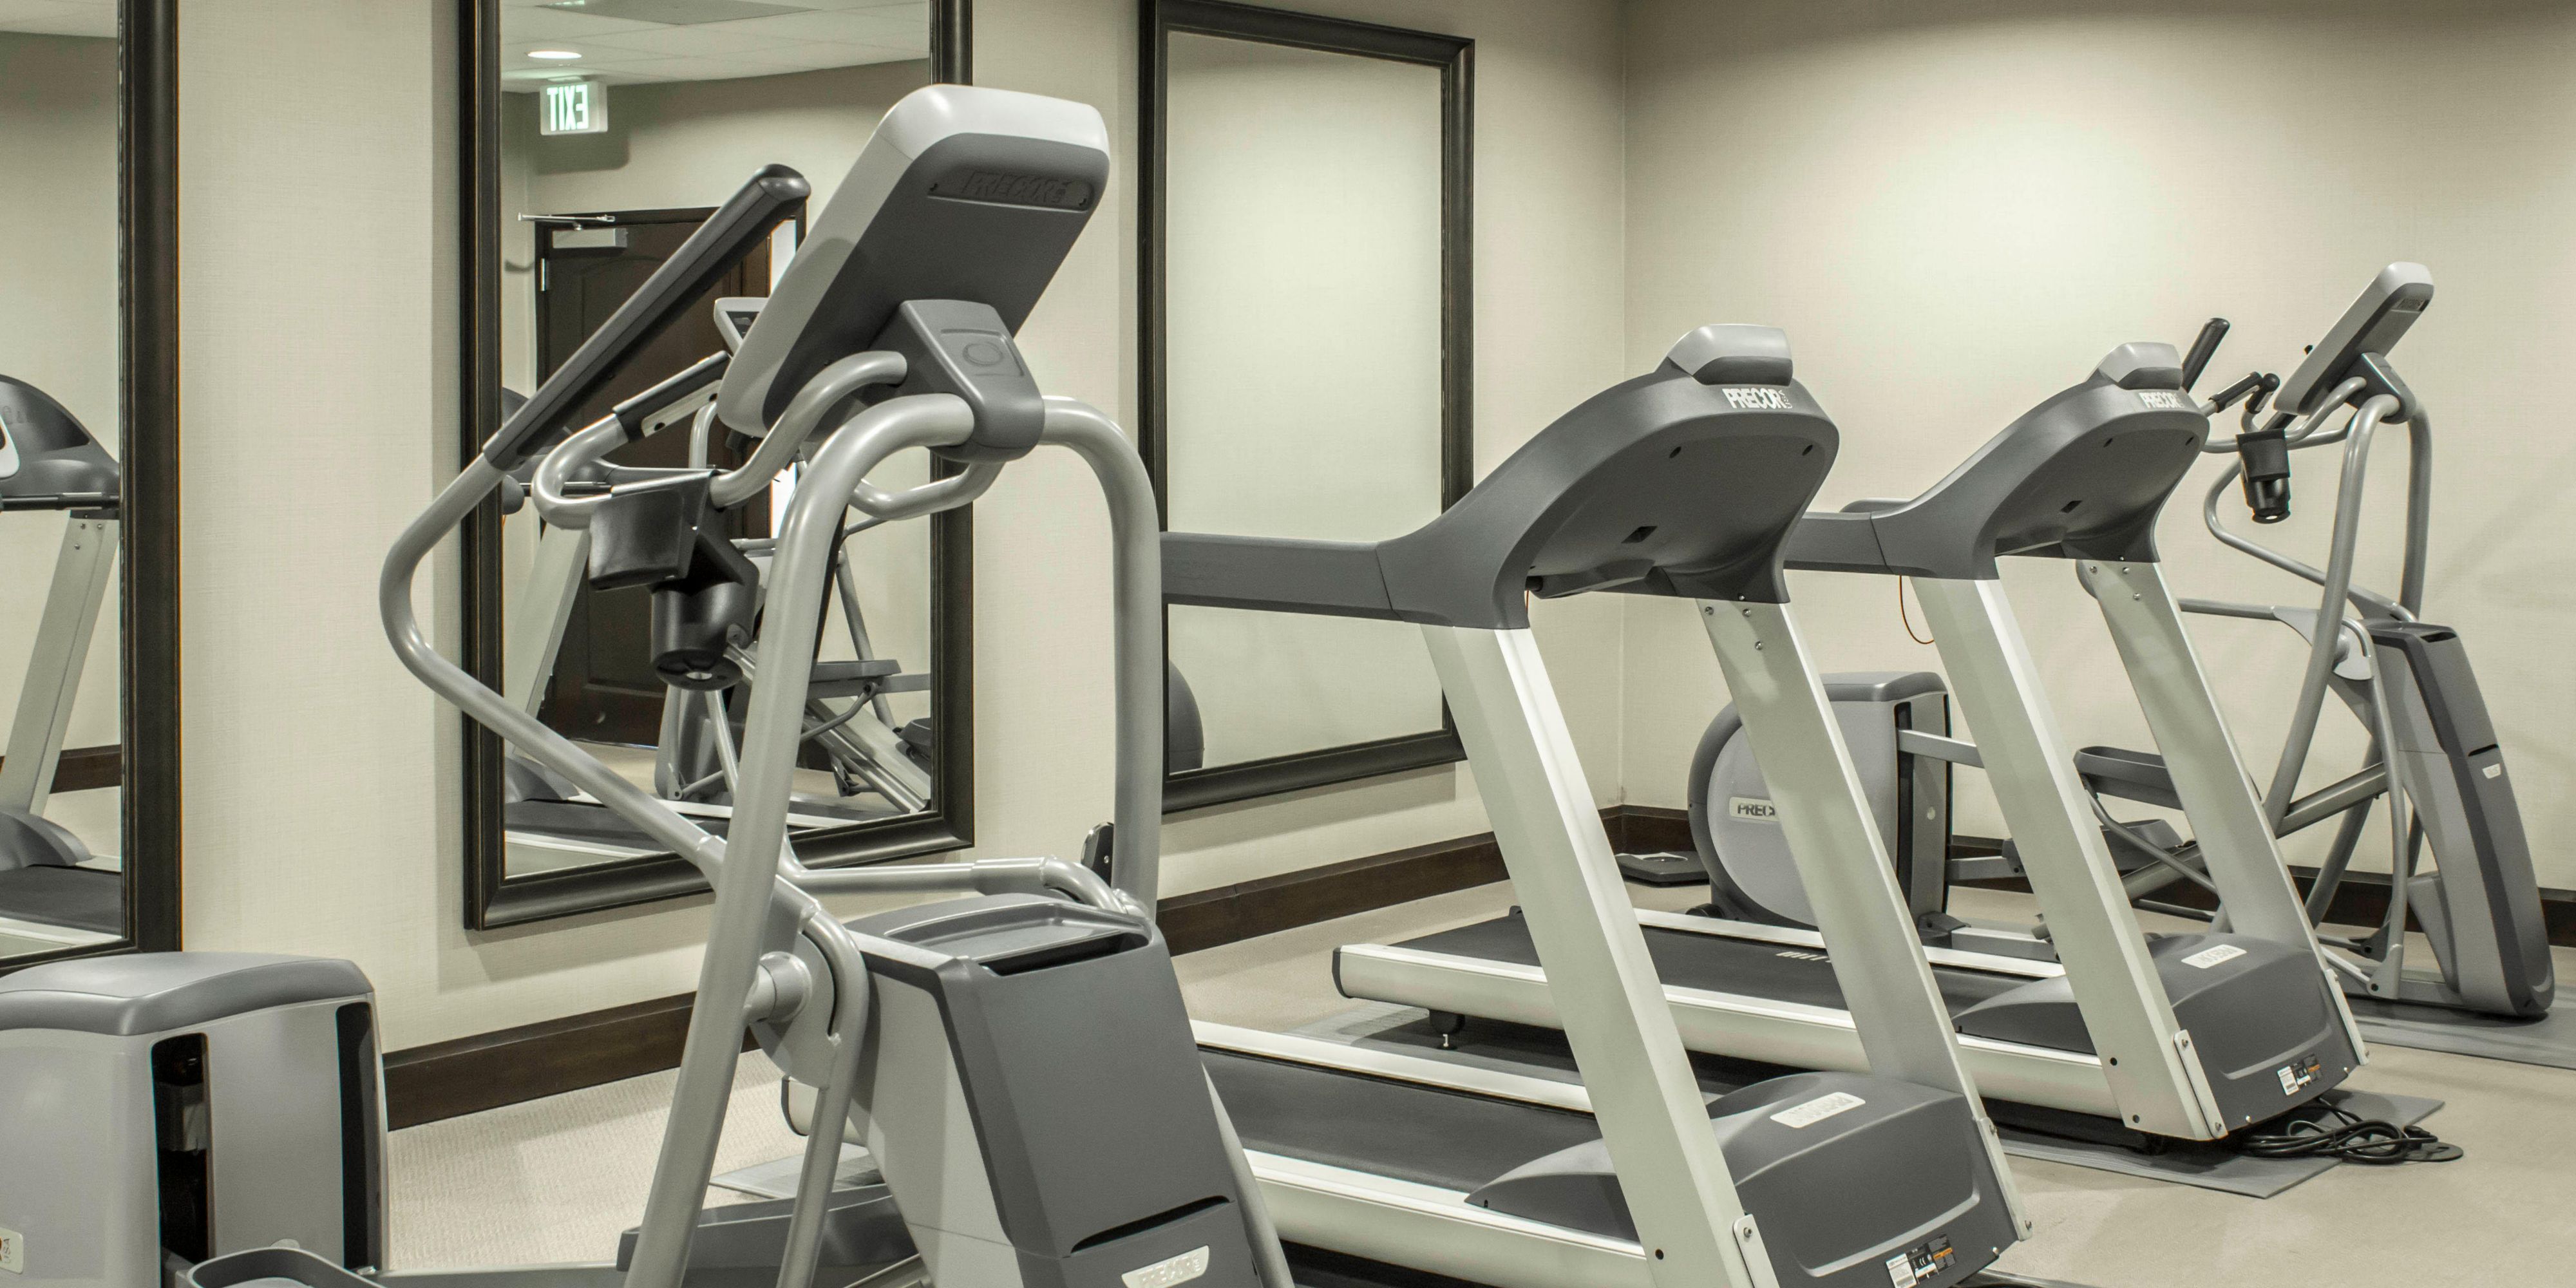 Work out in our fitness center at our hotel near Camp Lejeune.